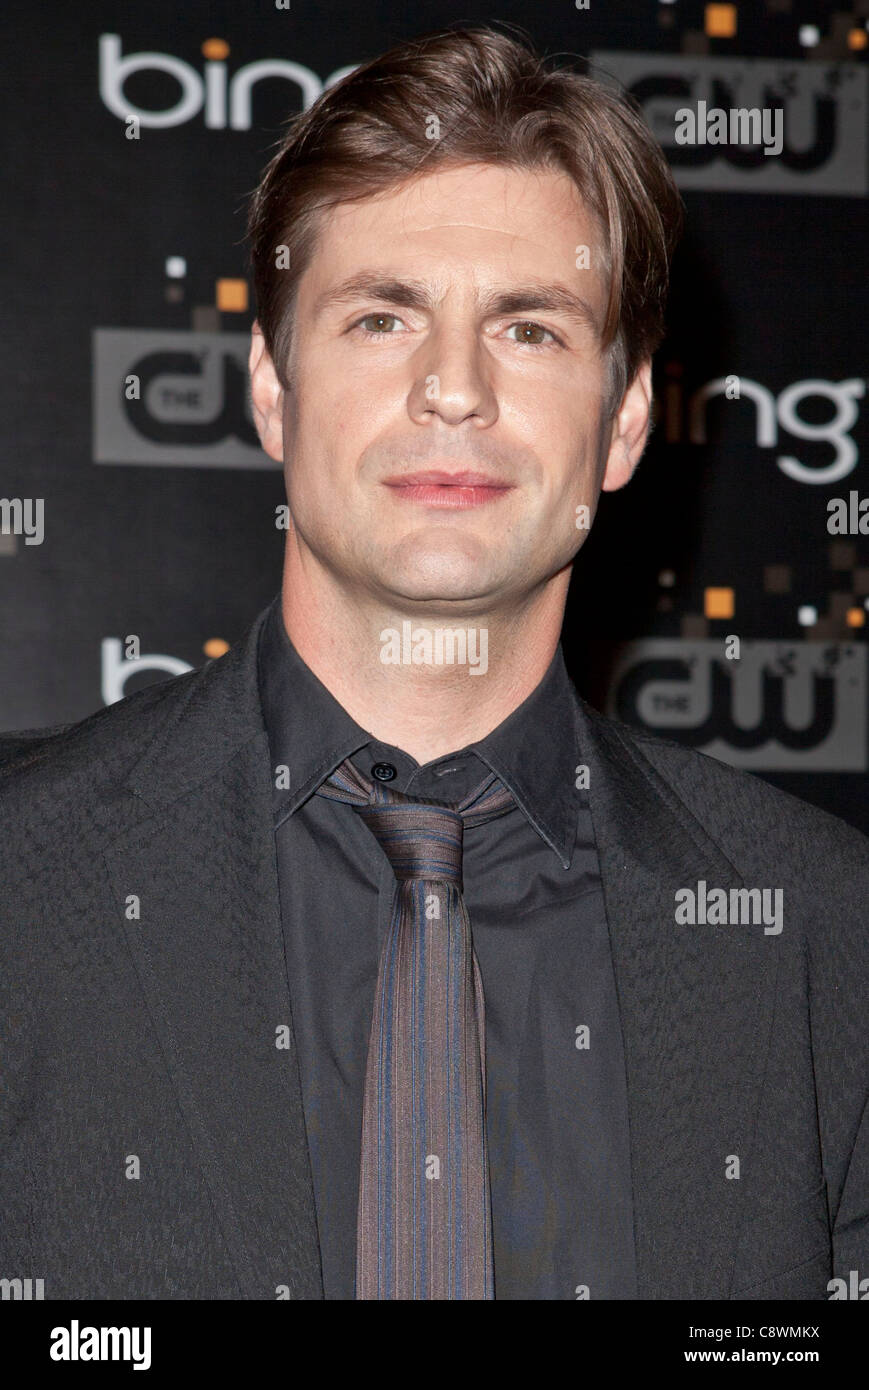 Gale Harold arrivals Bing PresentsCW Premiere Party Steven J Ross Theater Burbank CA September 10 2011 Photo Emiley Stock Photo